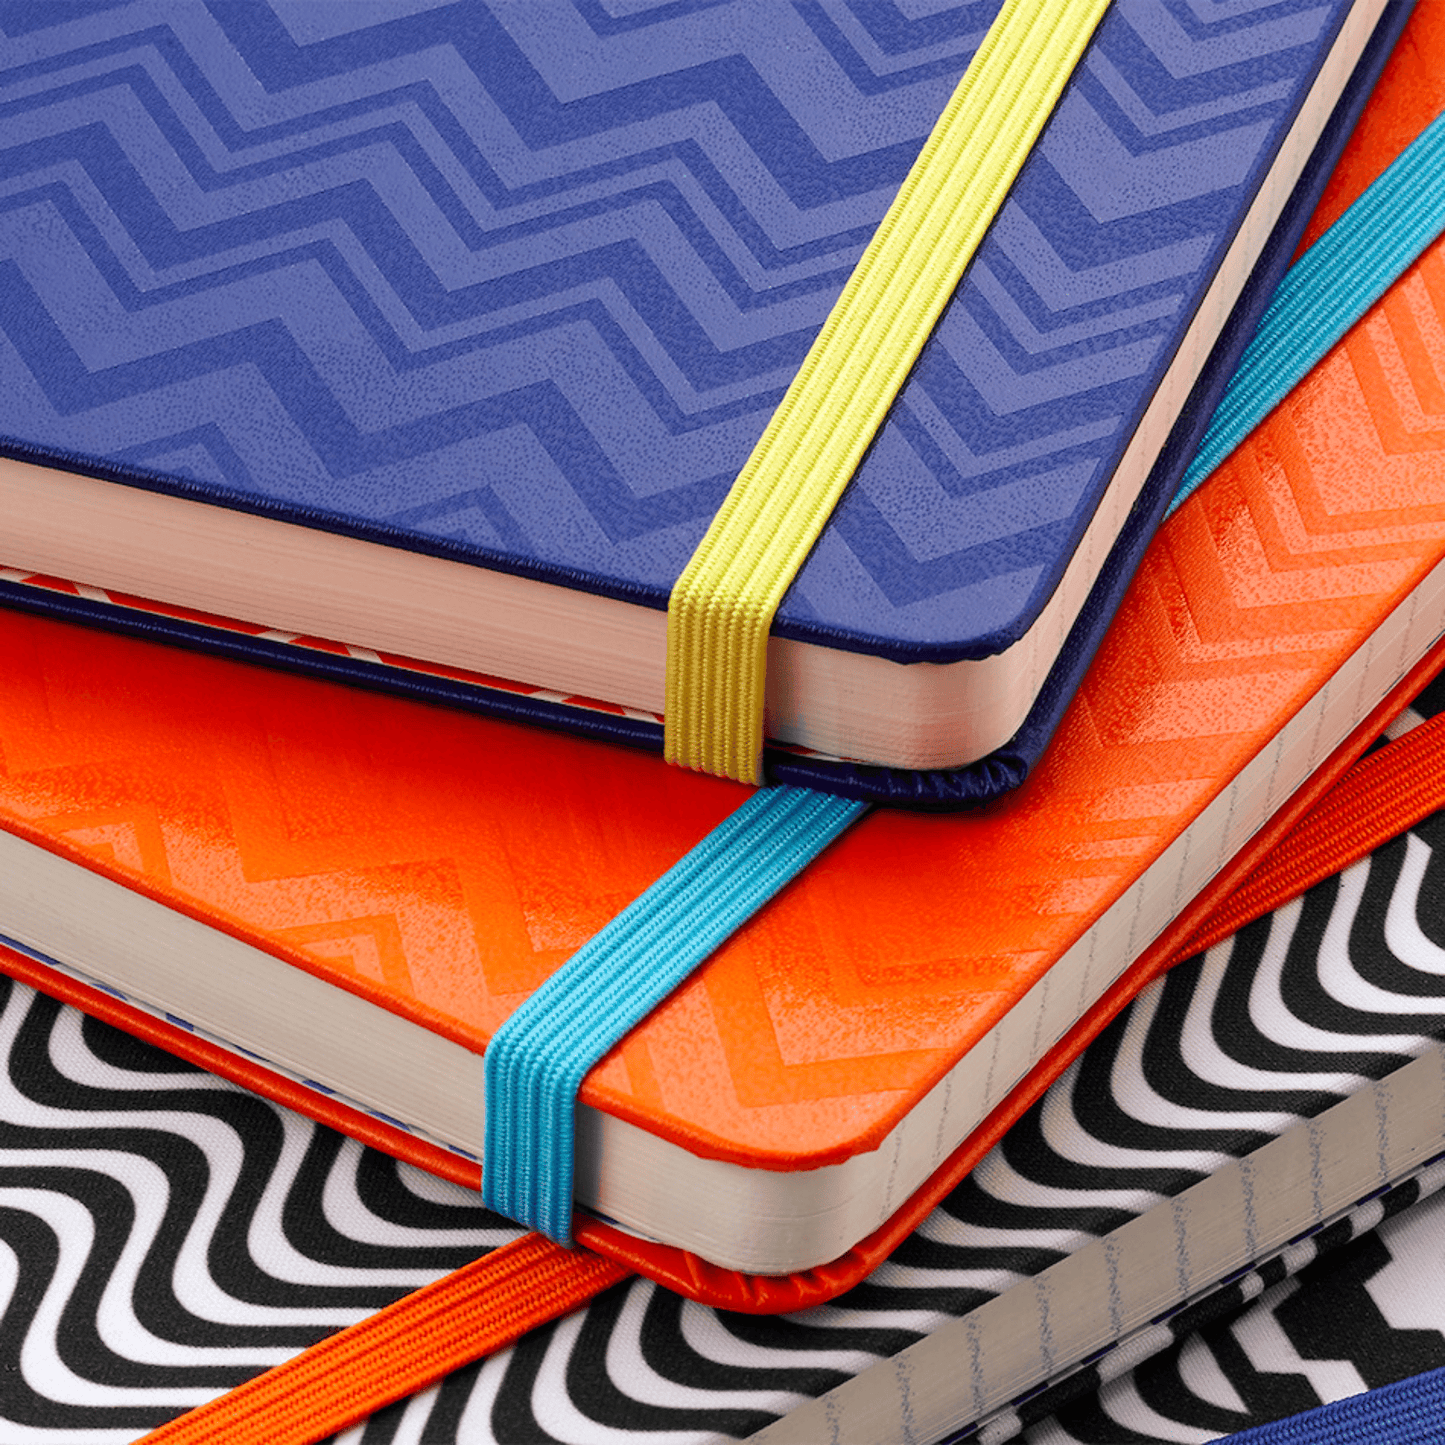 Missoni Hard Cover Ruled Notebook Blue - Large